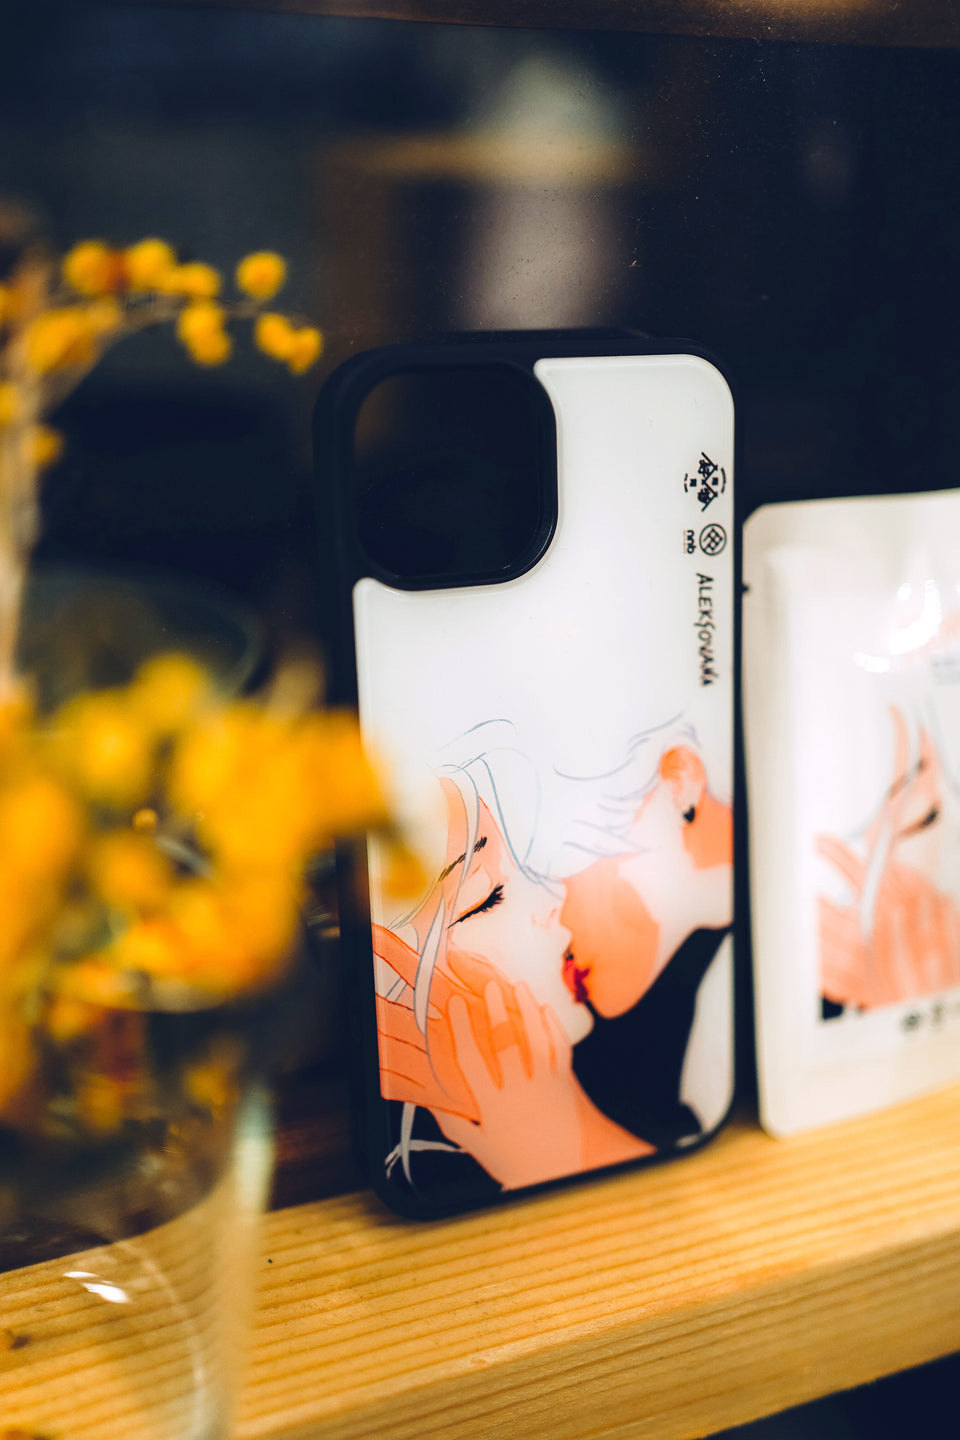 nnb x Aleksovana Water Collection Phone Case with Drip Bag - Vday Special